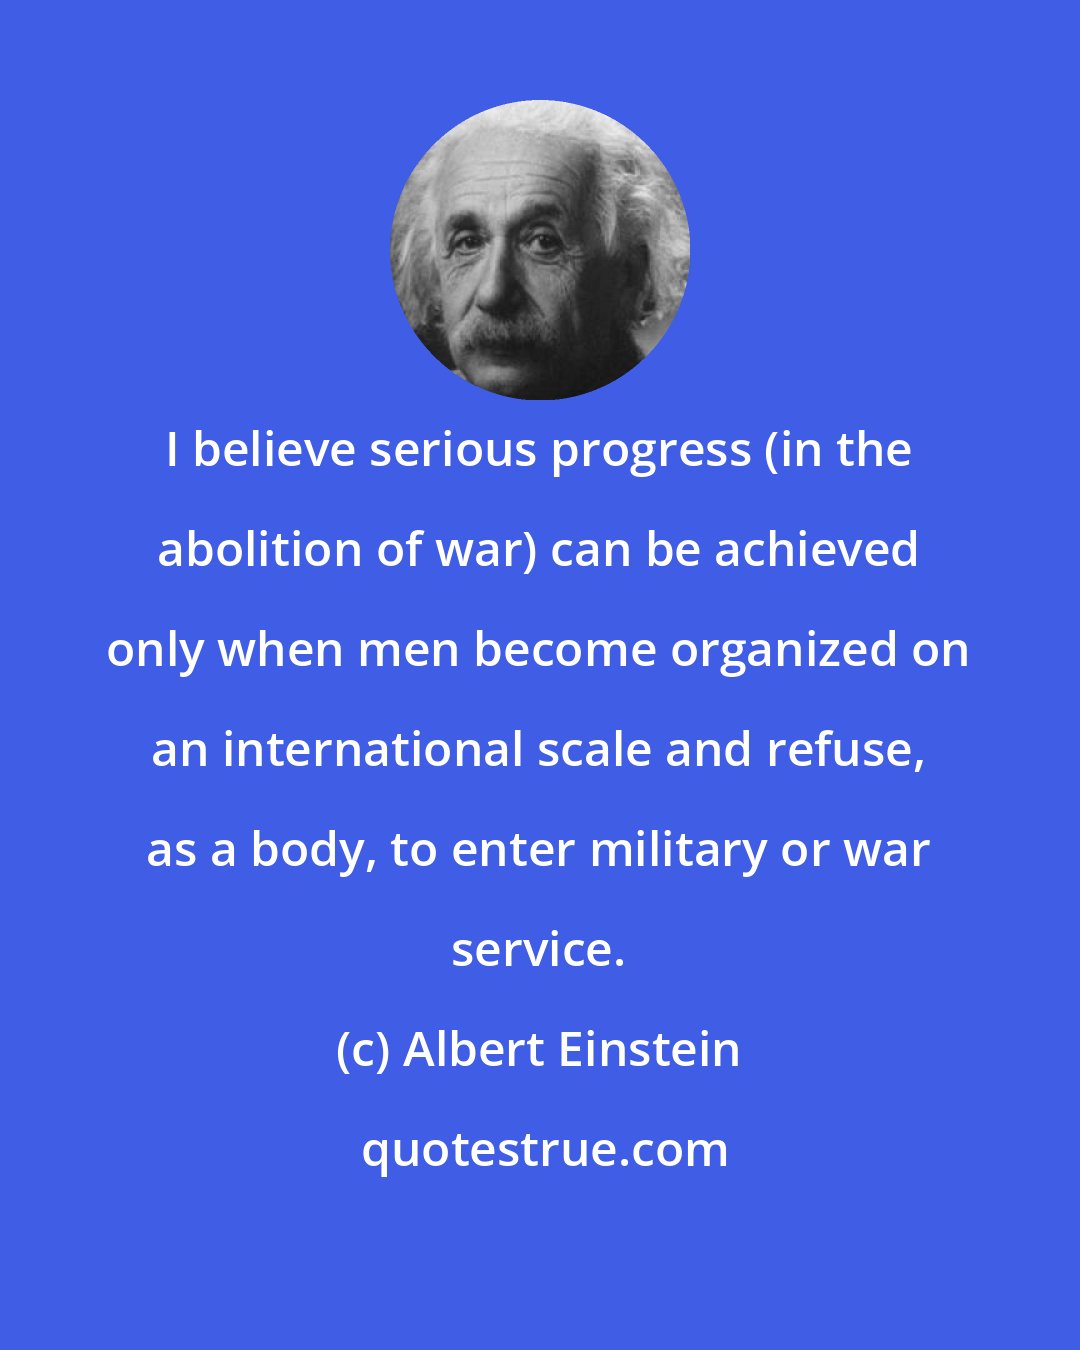 Albert Einstein: I believe serious progress (in the abolition of war) can be achieved only when men become organized on an international scale and refuse, as a body, to enter military or war service.